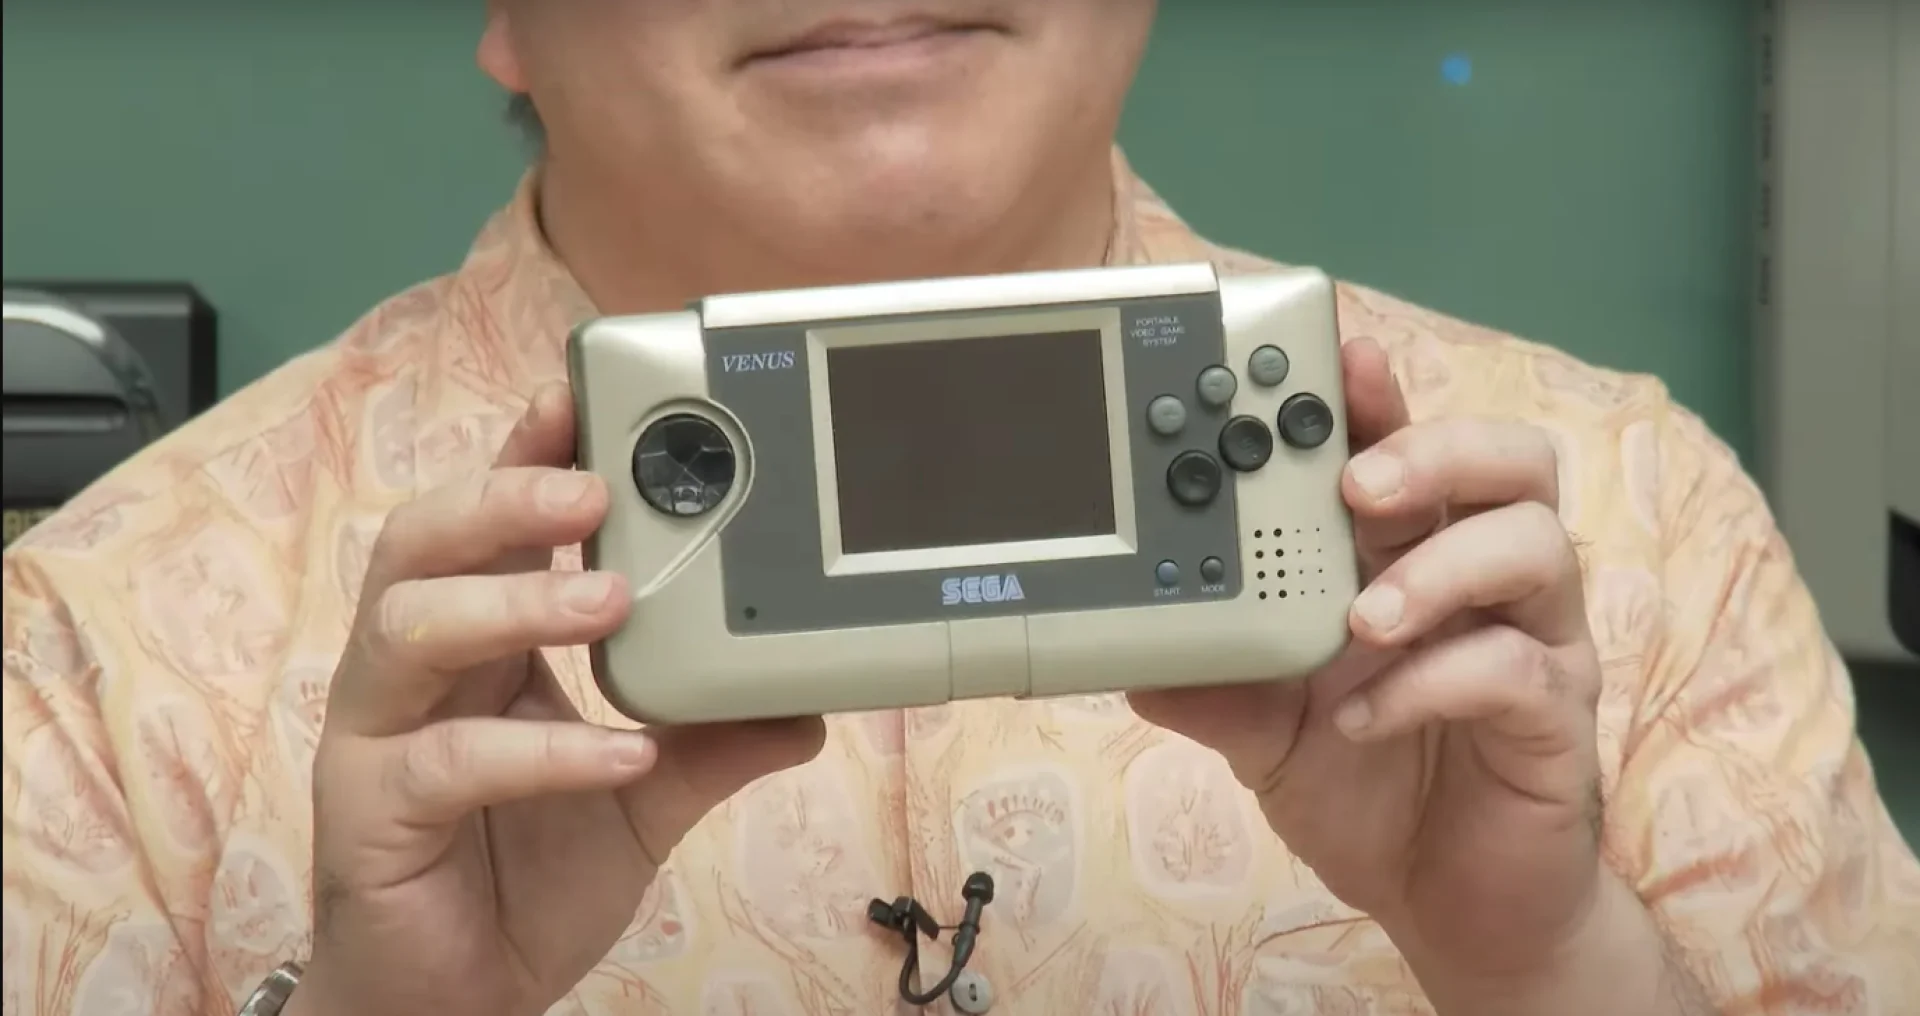 Sega Showed off The Venus Prototype For The First Time